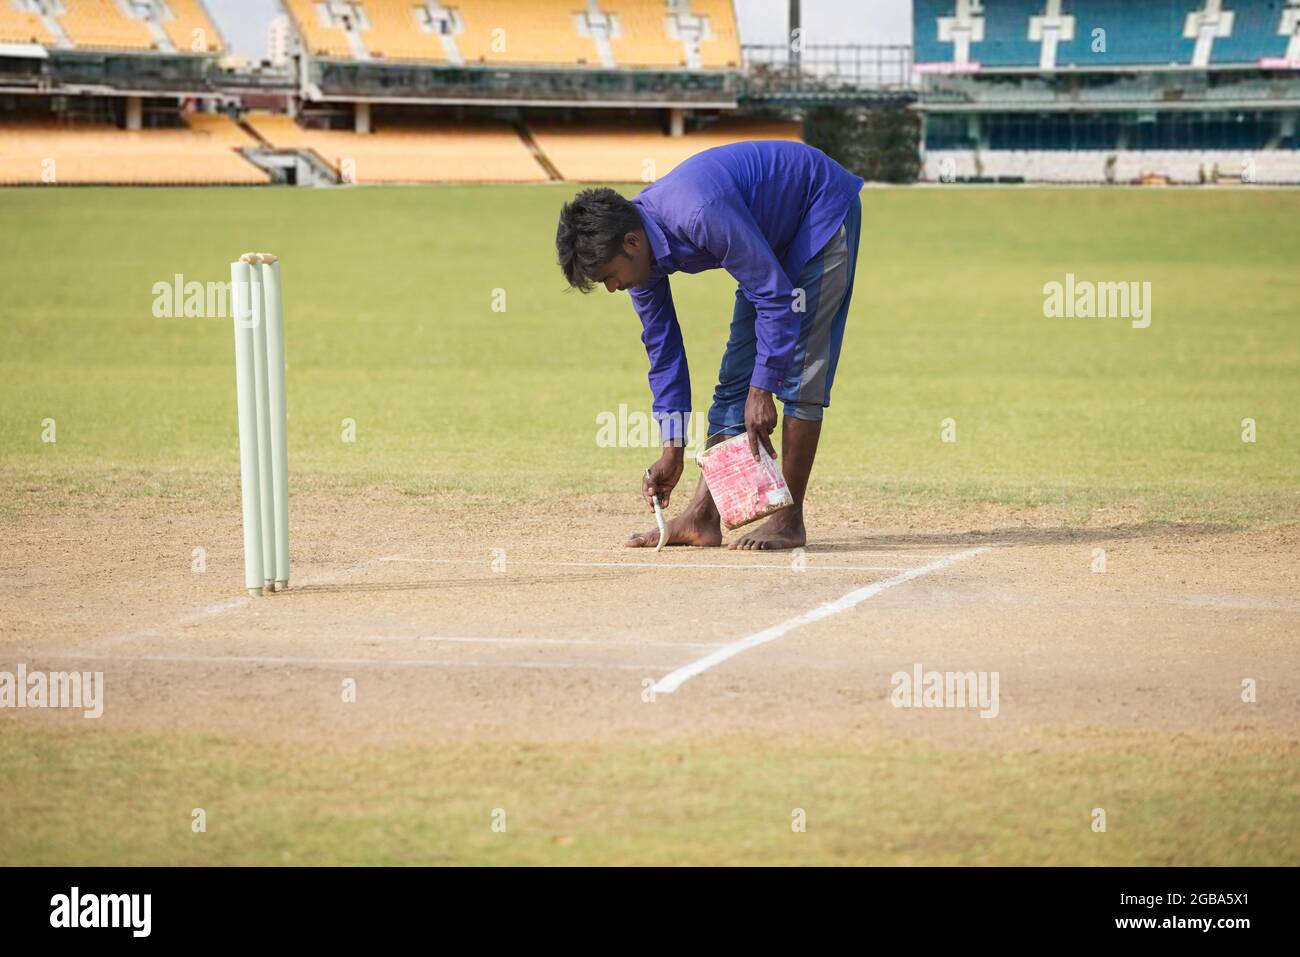 Groundsman making the crease before a match Stock Photo